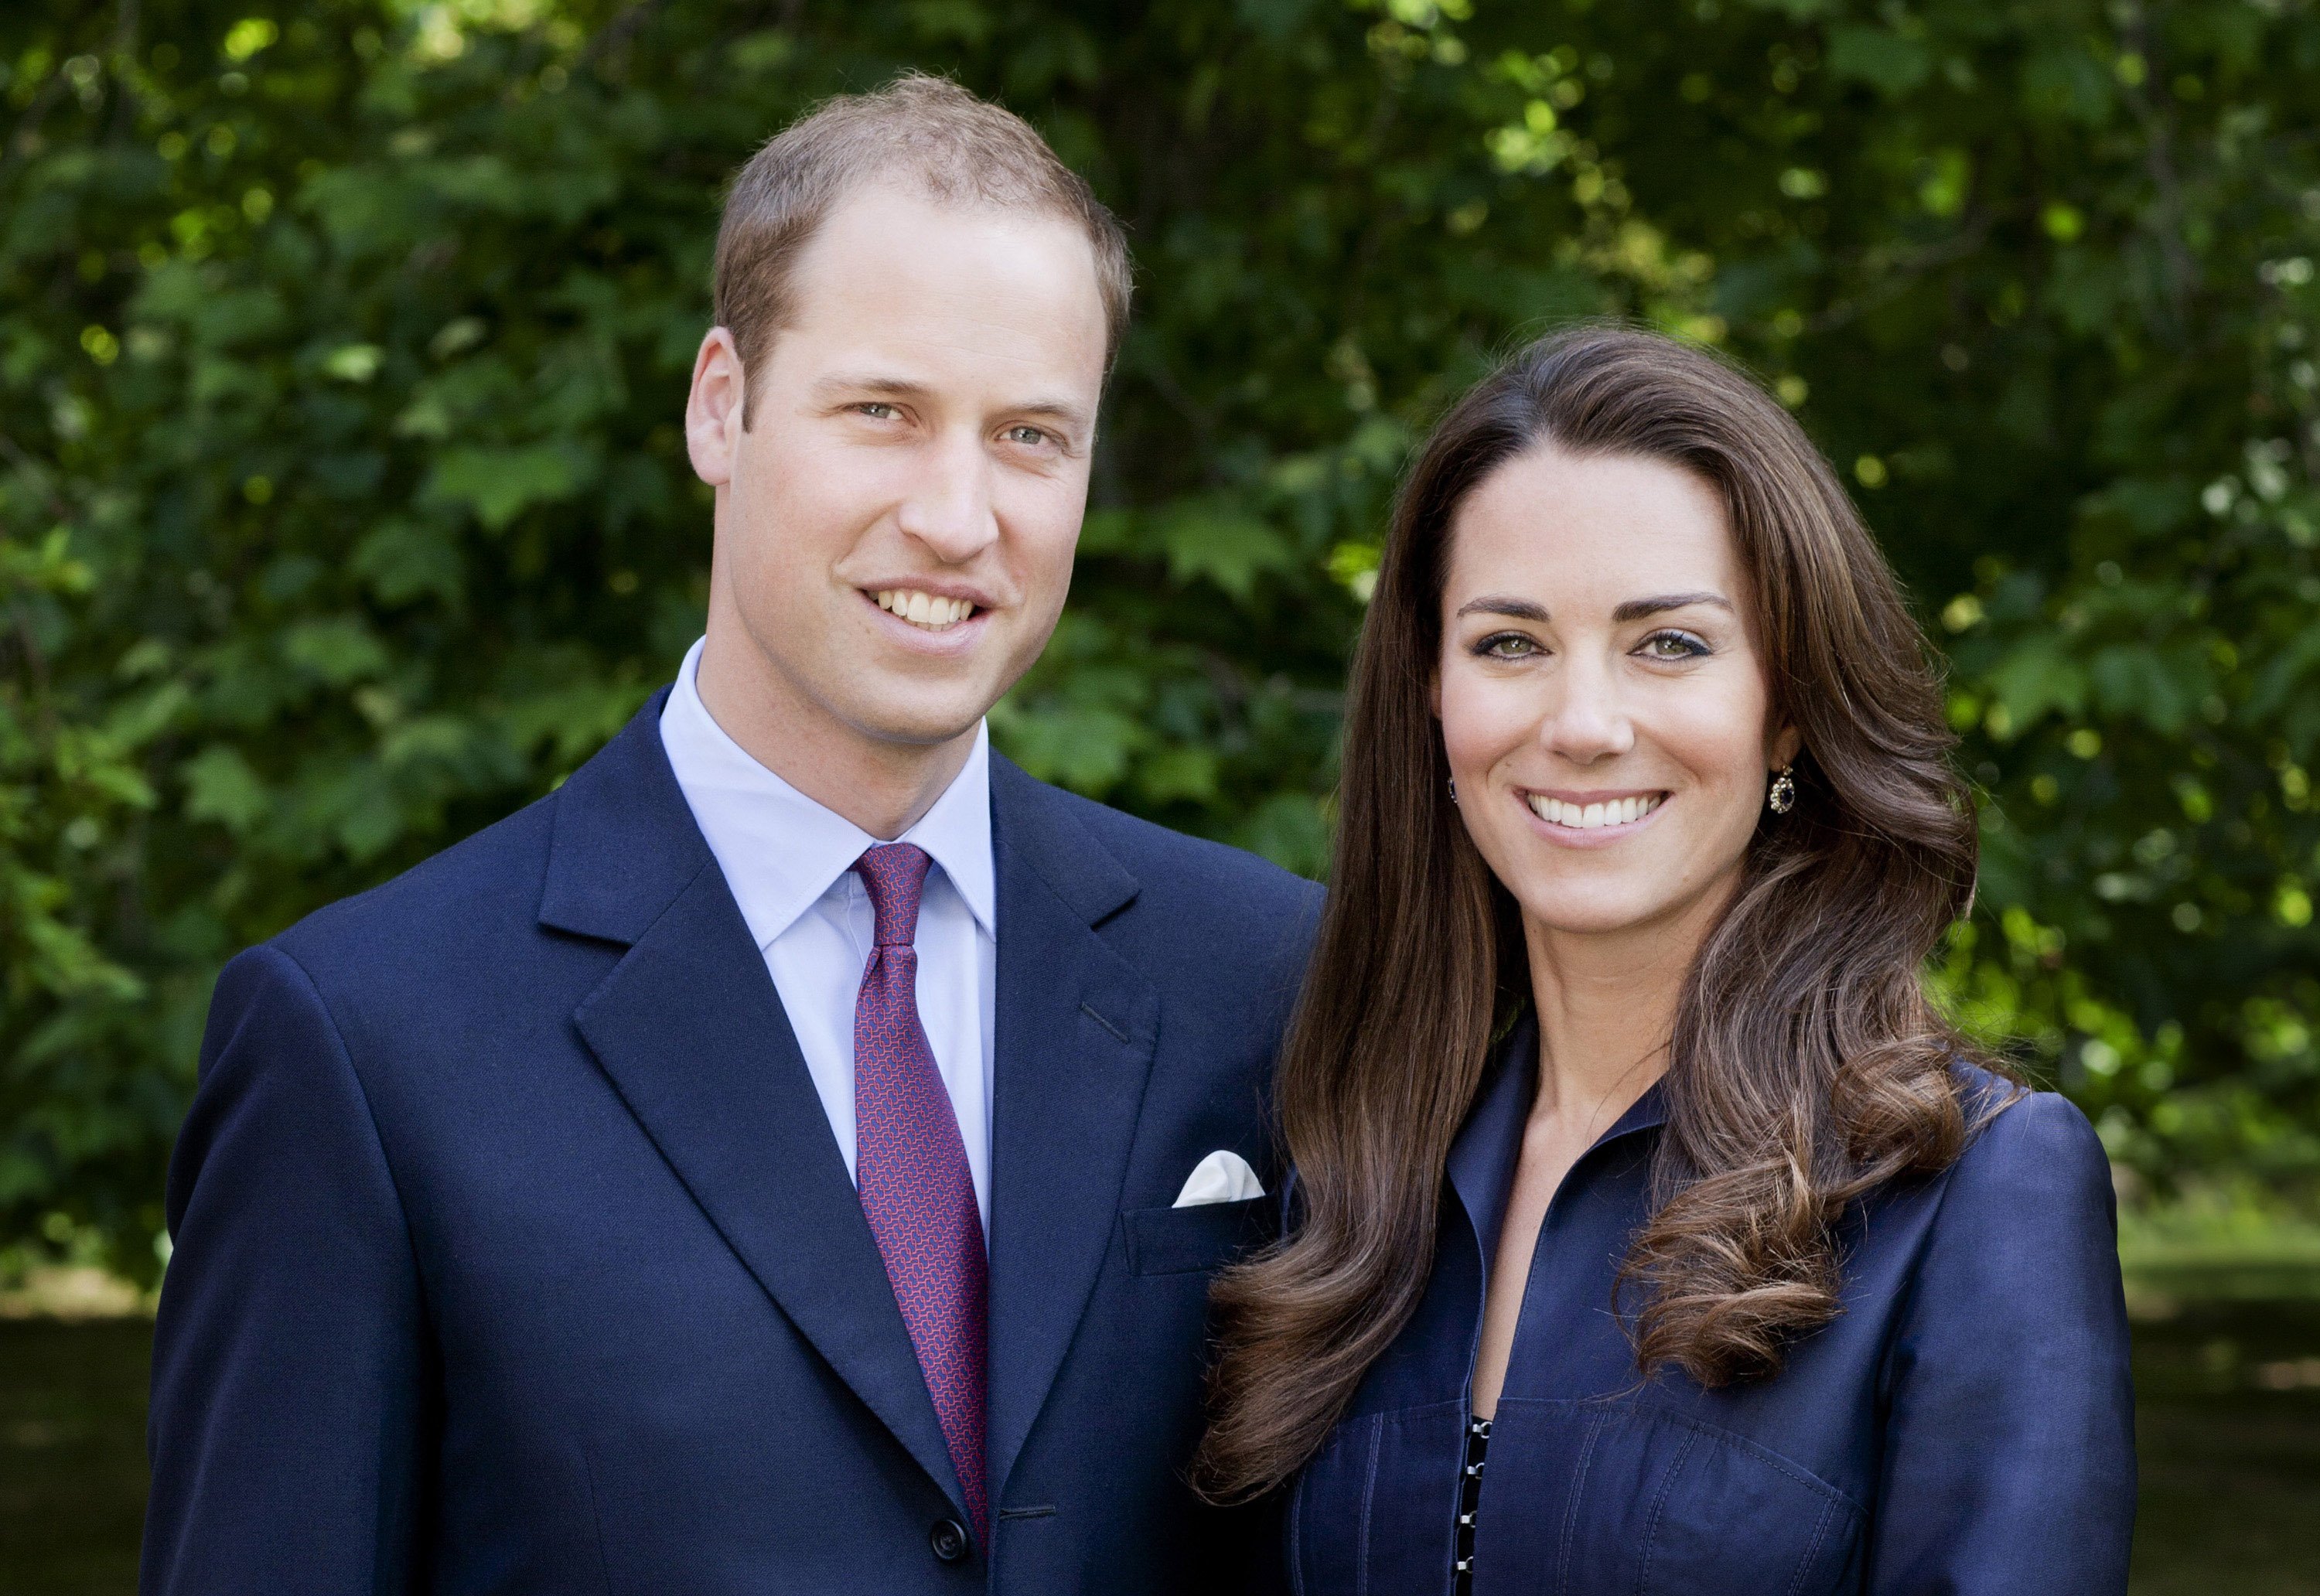 Prince William and Kate Middleton, pose for the official tour portrait for their trip to Canada and California in the Garden's of Clarence House on June 3, 2011 in London. England | Photo: Getty Images